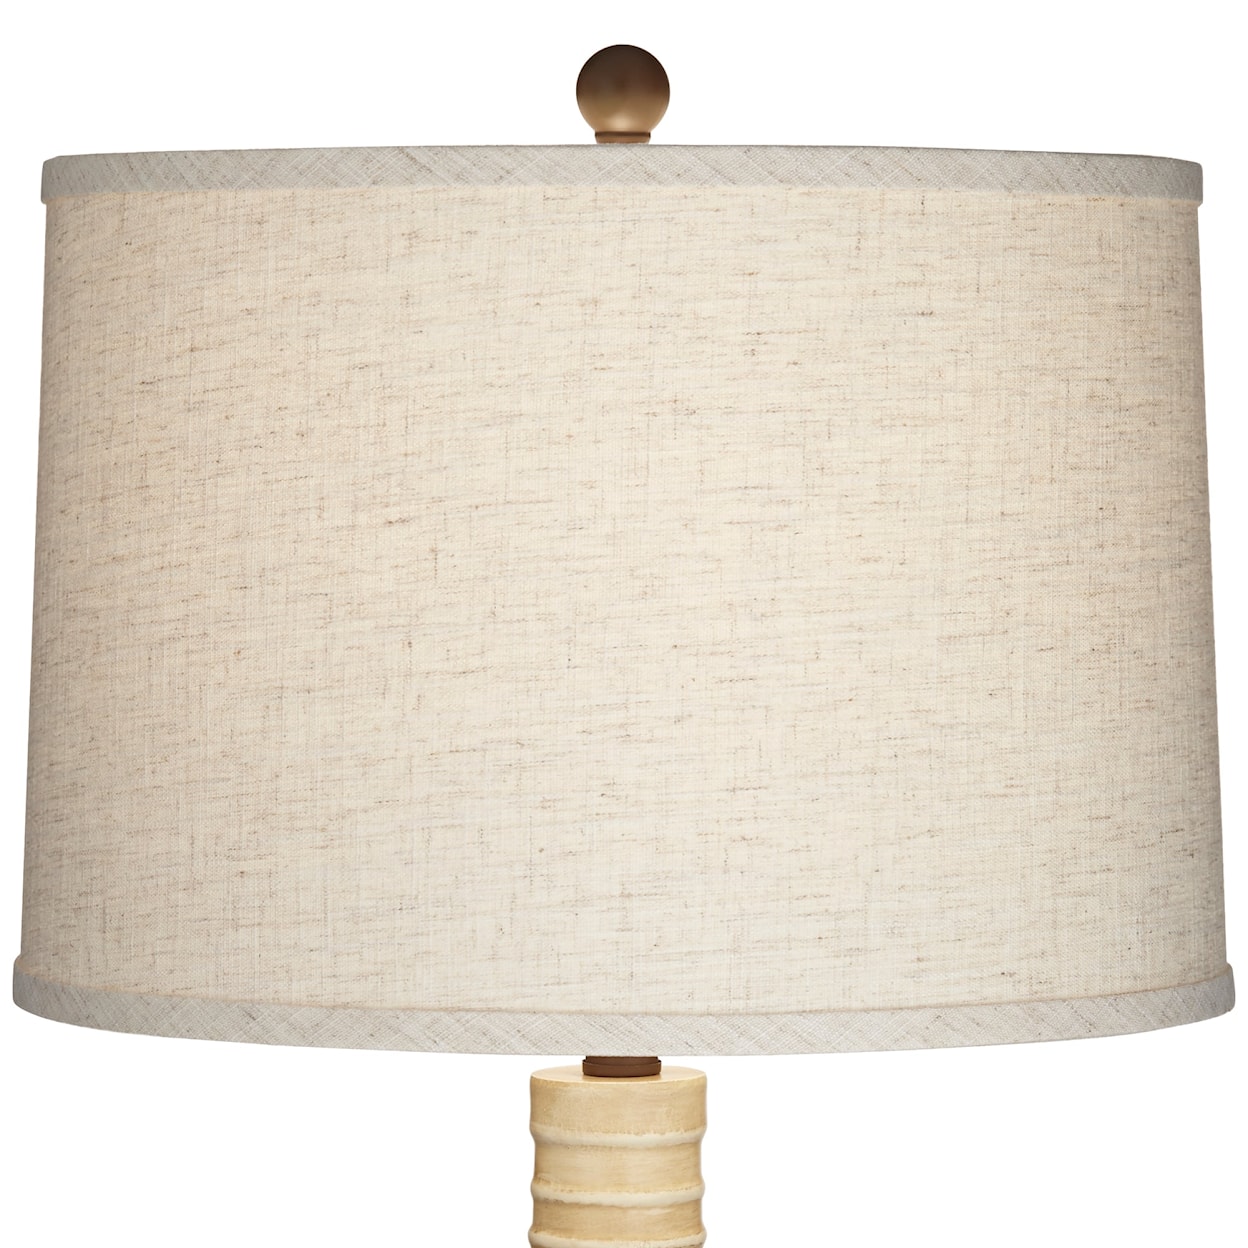 Pacific Coast Lighting Pacific Coast Lighting TL-28" Resin with Straight Lines